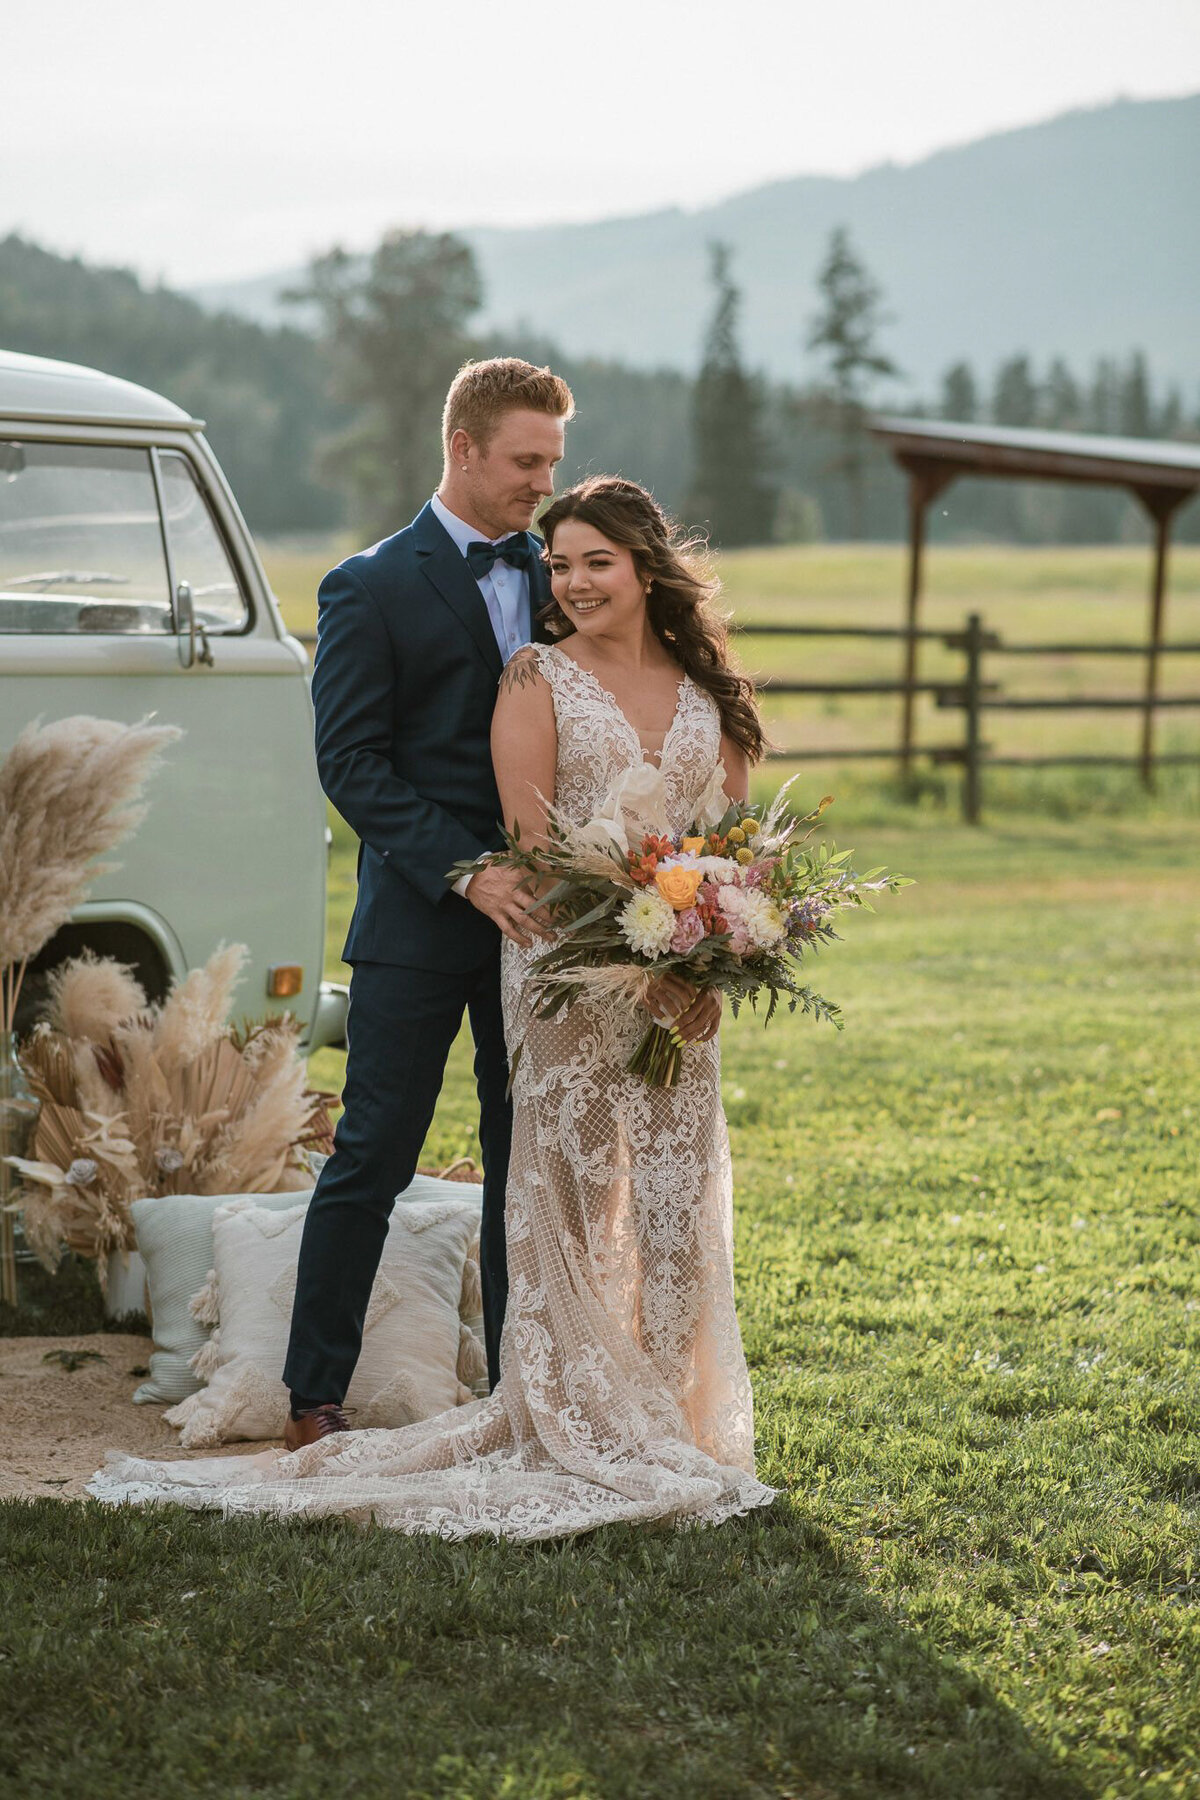 Bridal portrait with pampas and vintage Volkswagen van, captured by Photos by Marissa, nostalgic and romantic wedding photographer in Kelowna, BC. Featured on the Bronte Bride Vendor Guide.